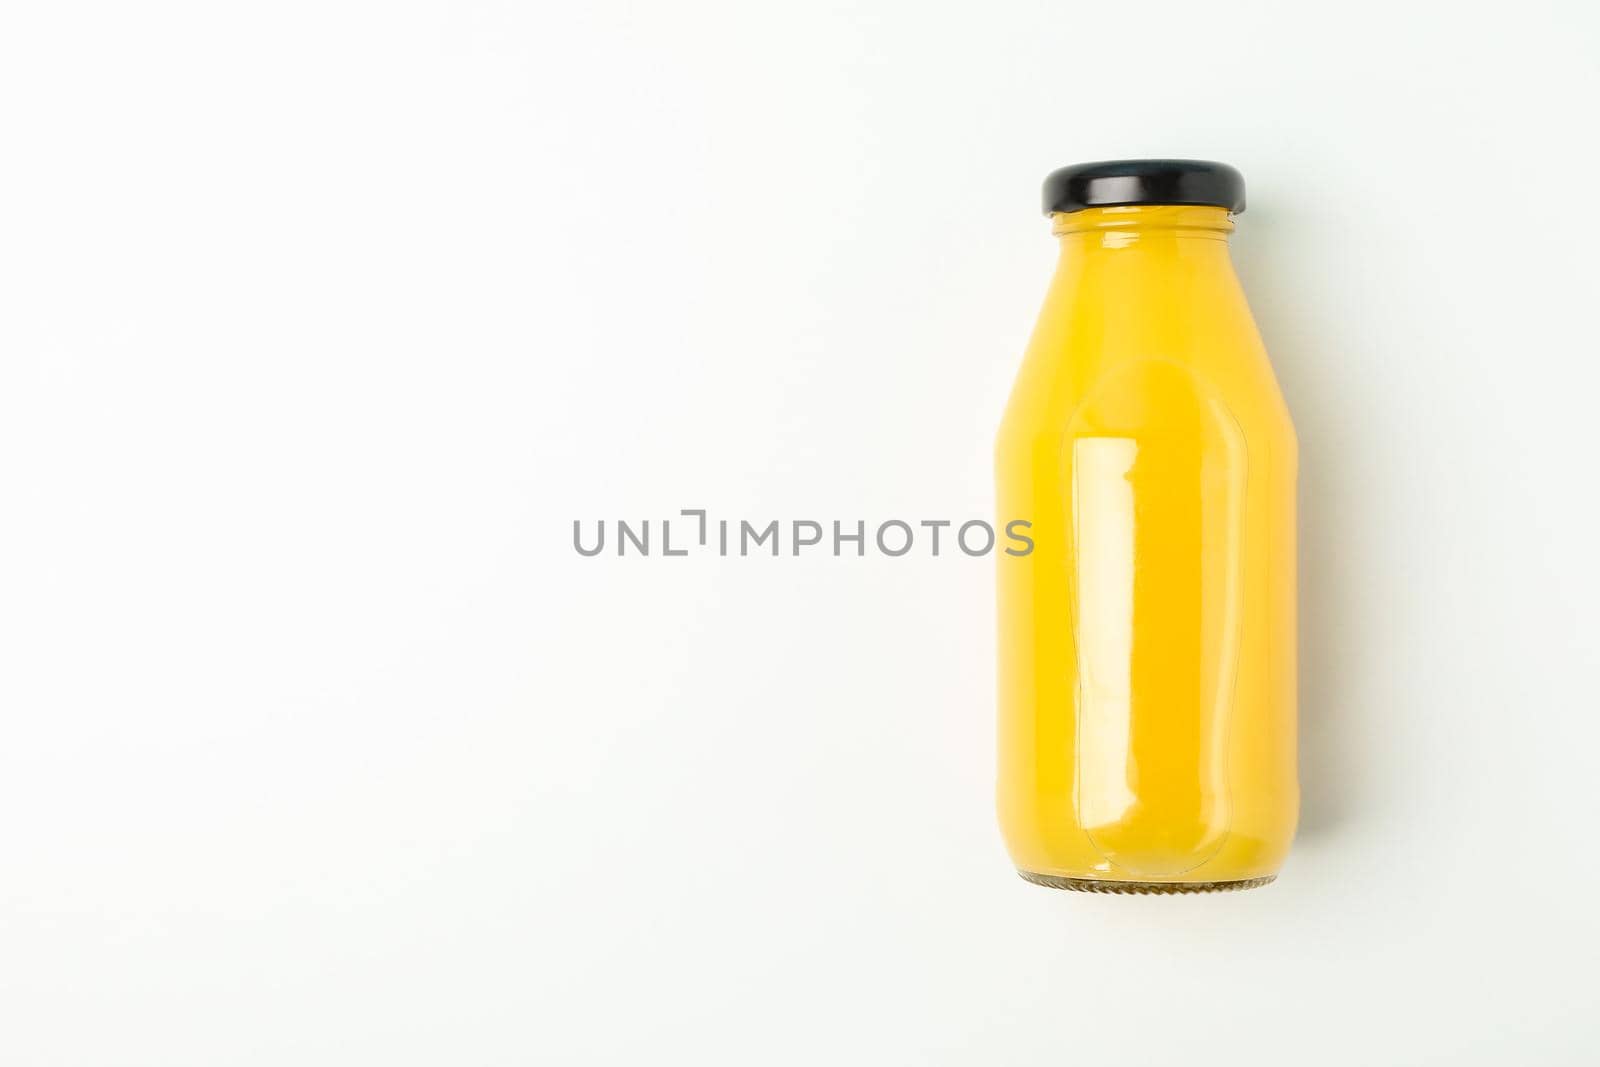 Fresh orange juice in bottle on white background, space for text. Fresh natural drink by AtlasCompany